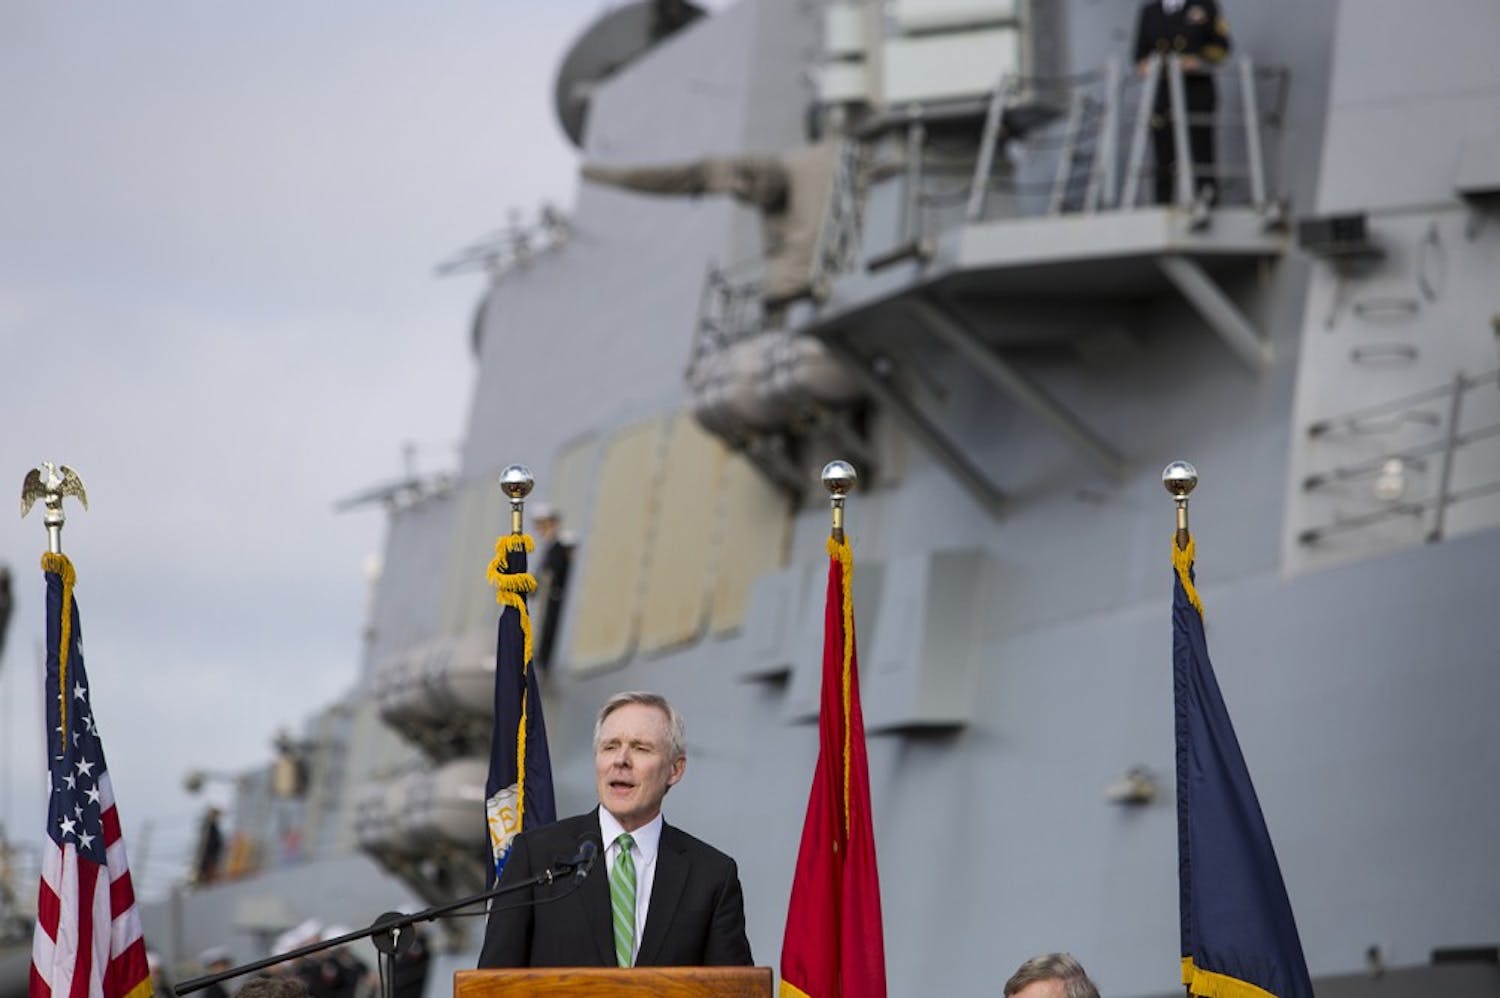 With guided missile destroyer USS Stockdale in the background, Secretary of the Navy Ray Mabus talks about how the Navy is creating the &quot;great green fleet,&quot; with the Stockdale becoming the first Navy ship to regularly run on a biofuel blend of traditional fuels and blend of cattle-fat that was turned into biodiesel. The Stockdale, part of the USS John C. Stennis Carrier Strike Group left North Island Naval Air Station on a seven-month deployment after the speech on Wednesday, Jan. 20, 2016. (Howard Lipin/San Diego Union-Tribune/TNS)